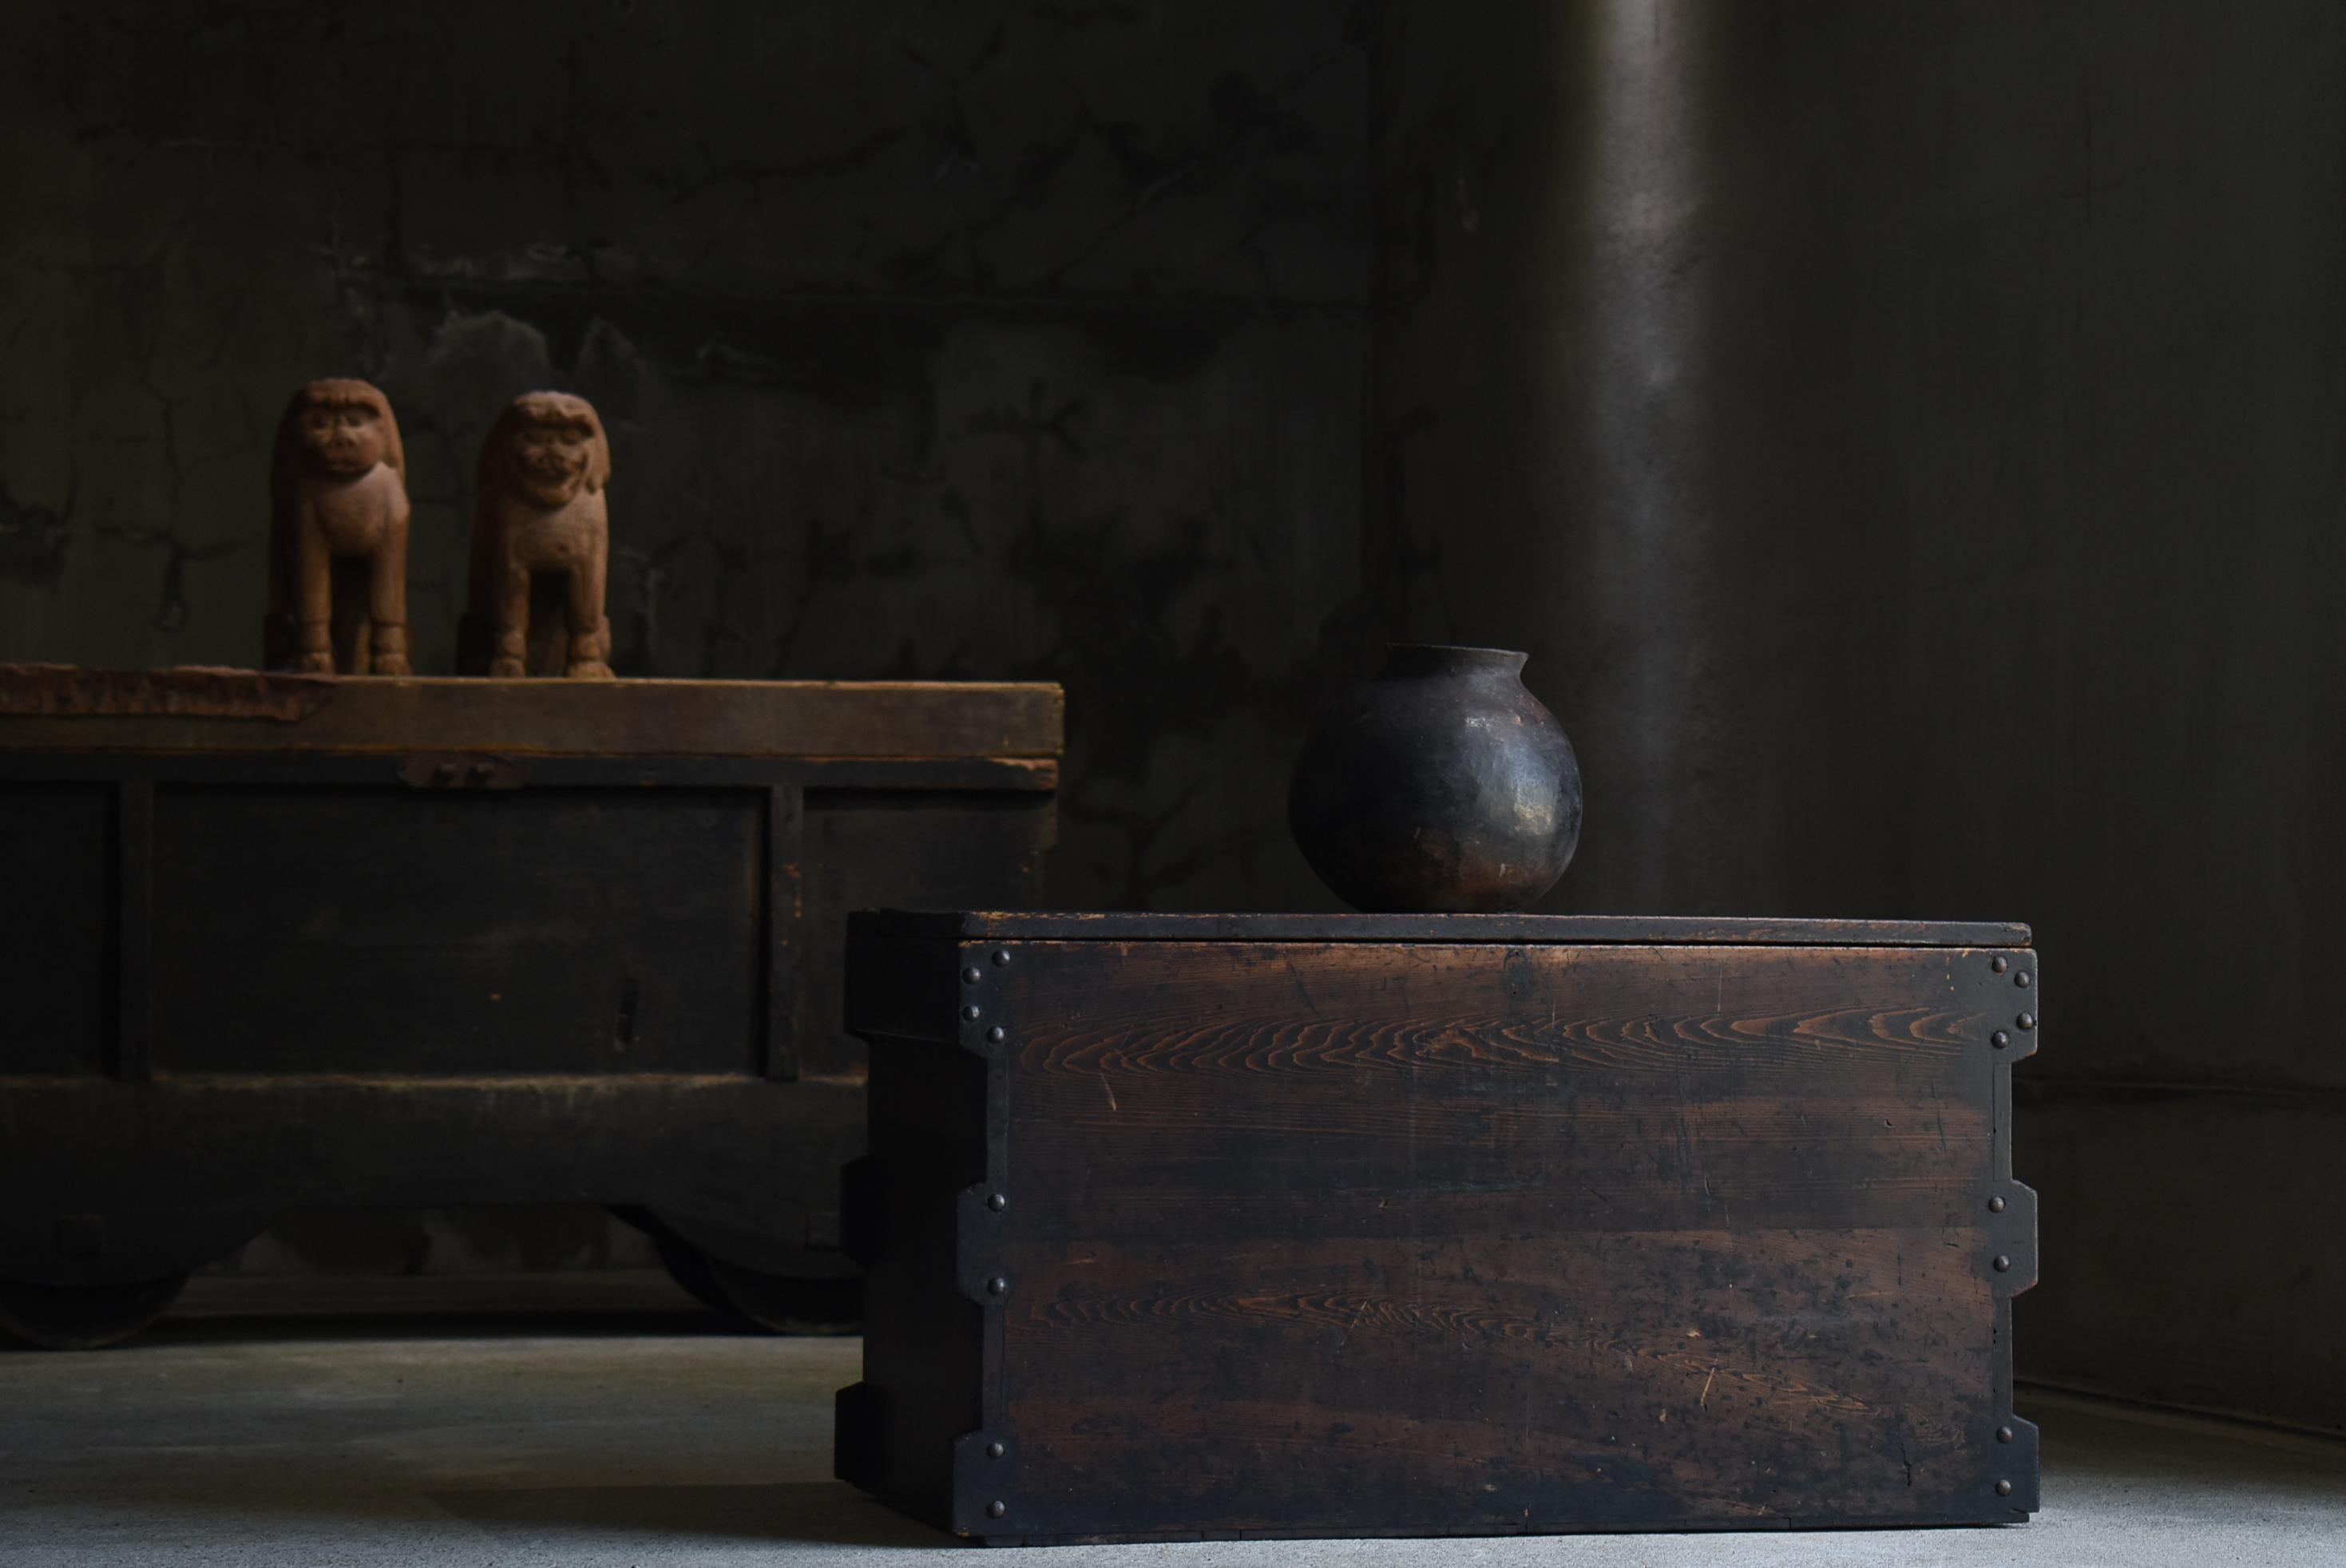 Very old Japanese black storage box.
Made in the Meiji era (1860s-1900s).
The material is cedar wood.

There are no unnecessary decorations, simple and beautiful.
It is the ultimate simplicity.
The jet-black color is also cool.

This furniture can